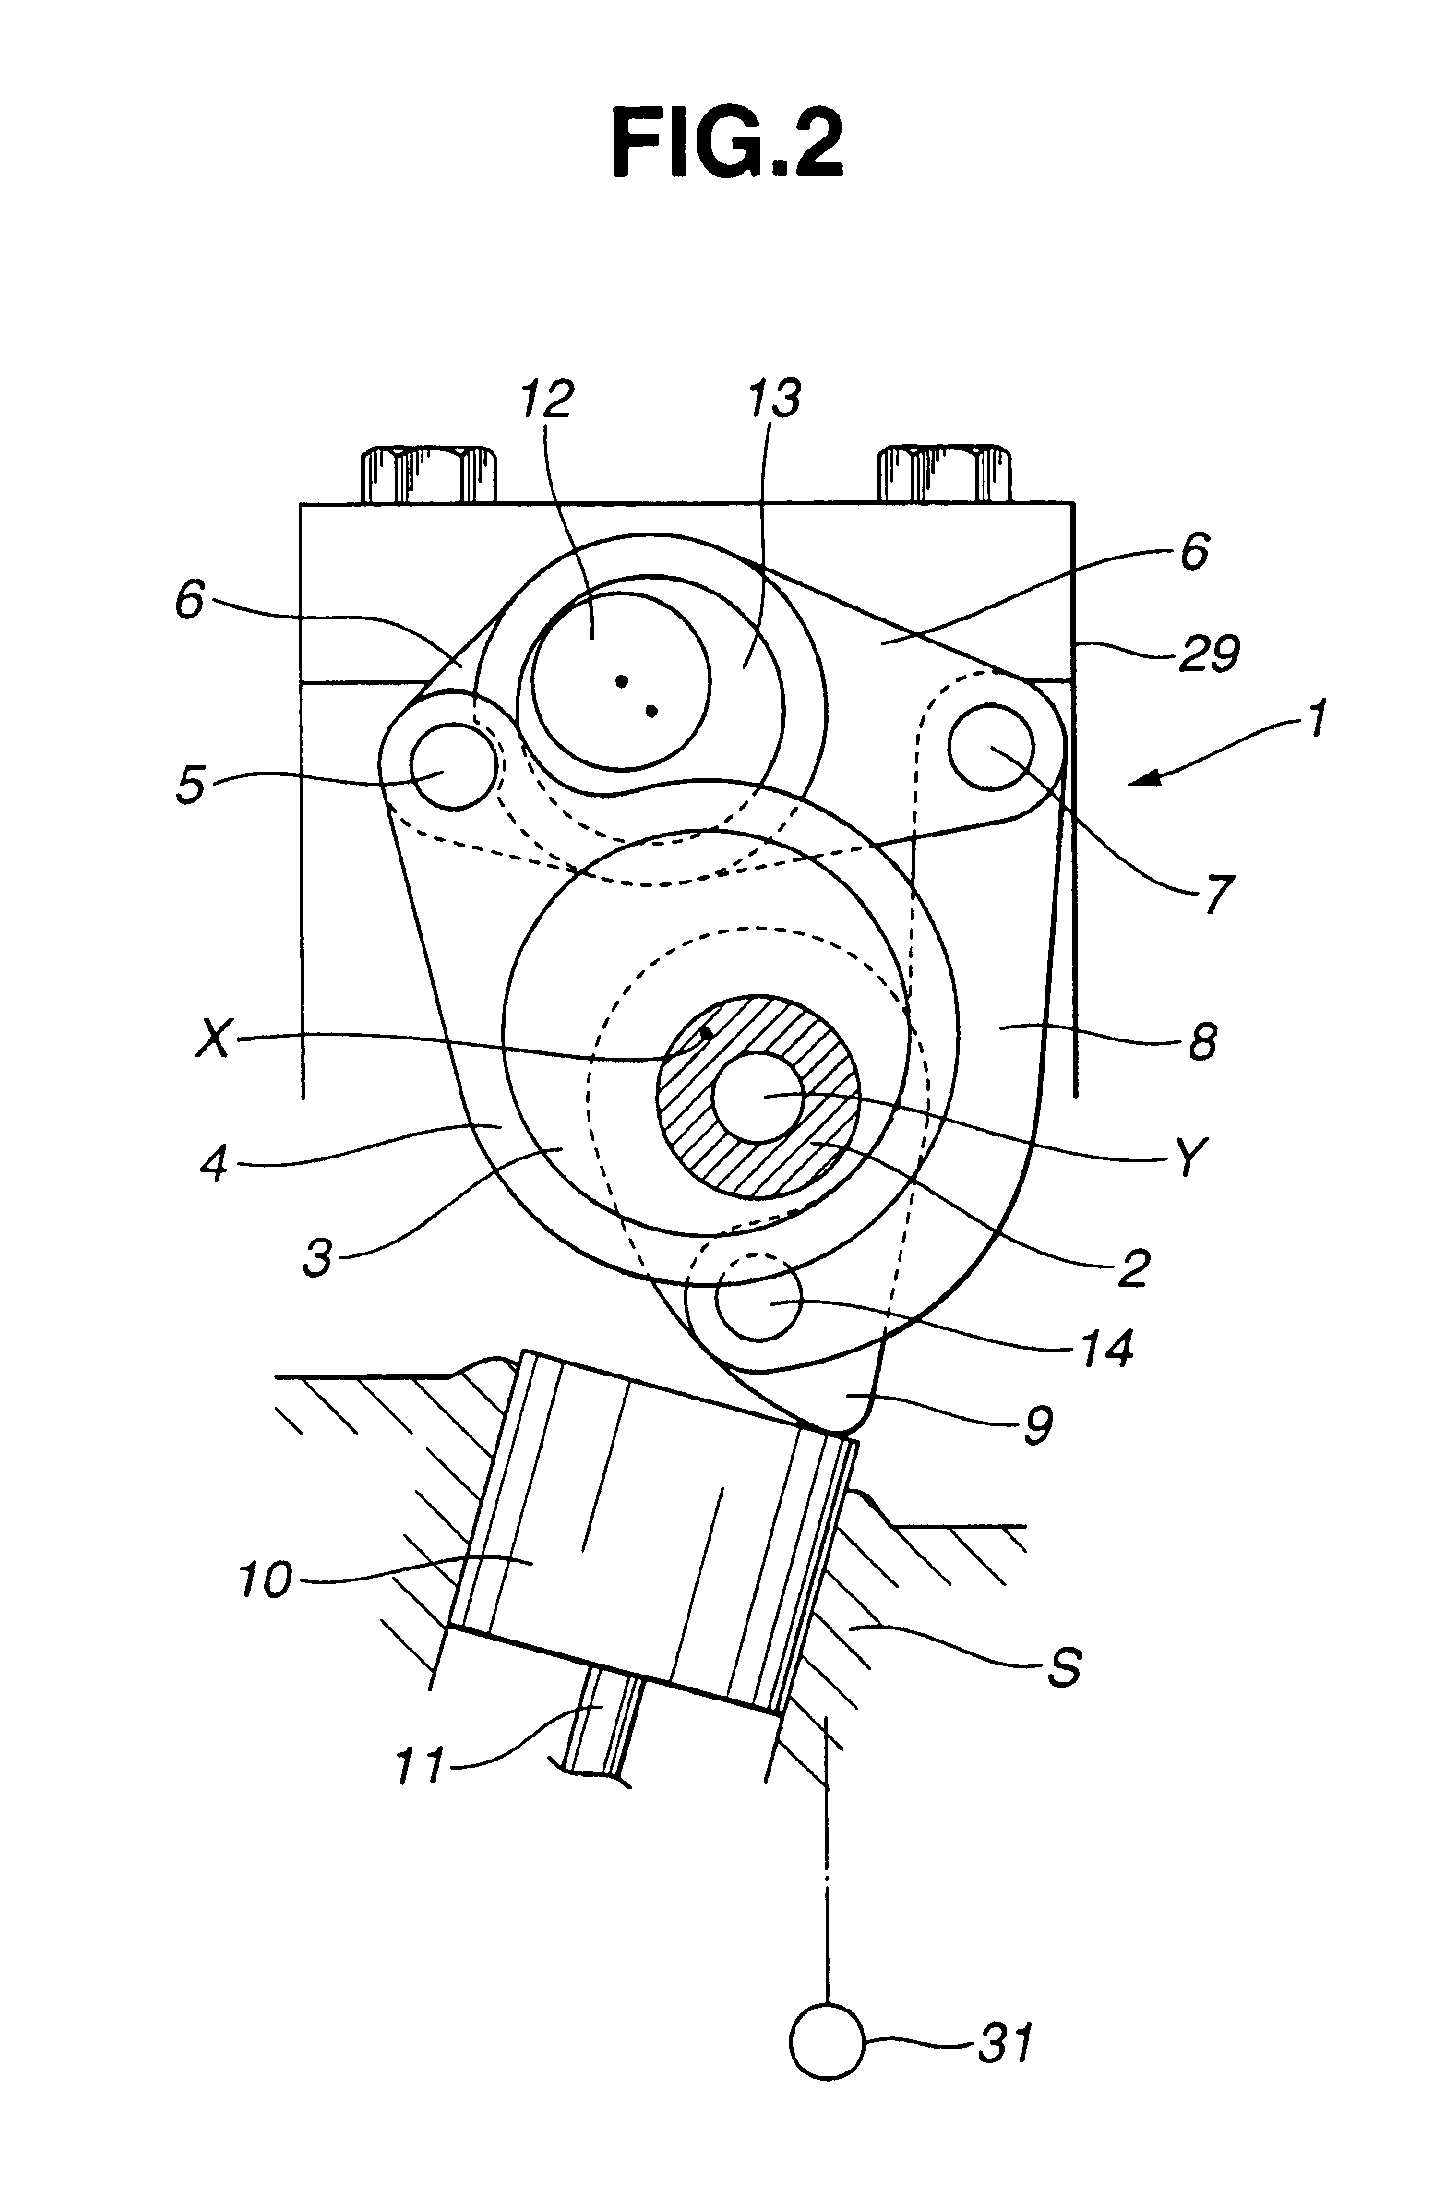 Control system and method for an internal combustion engine